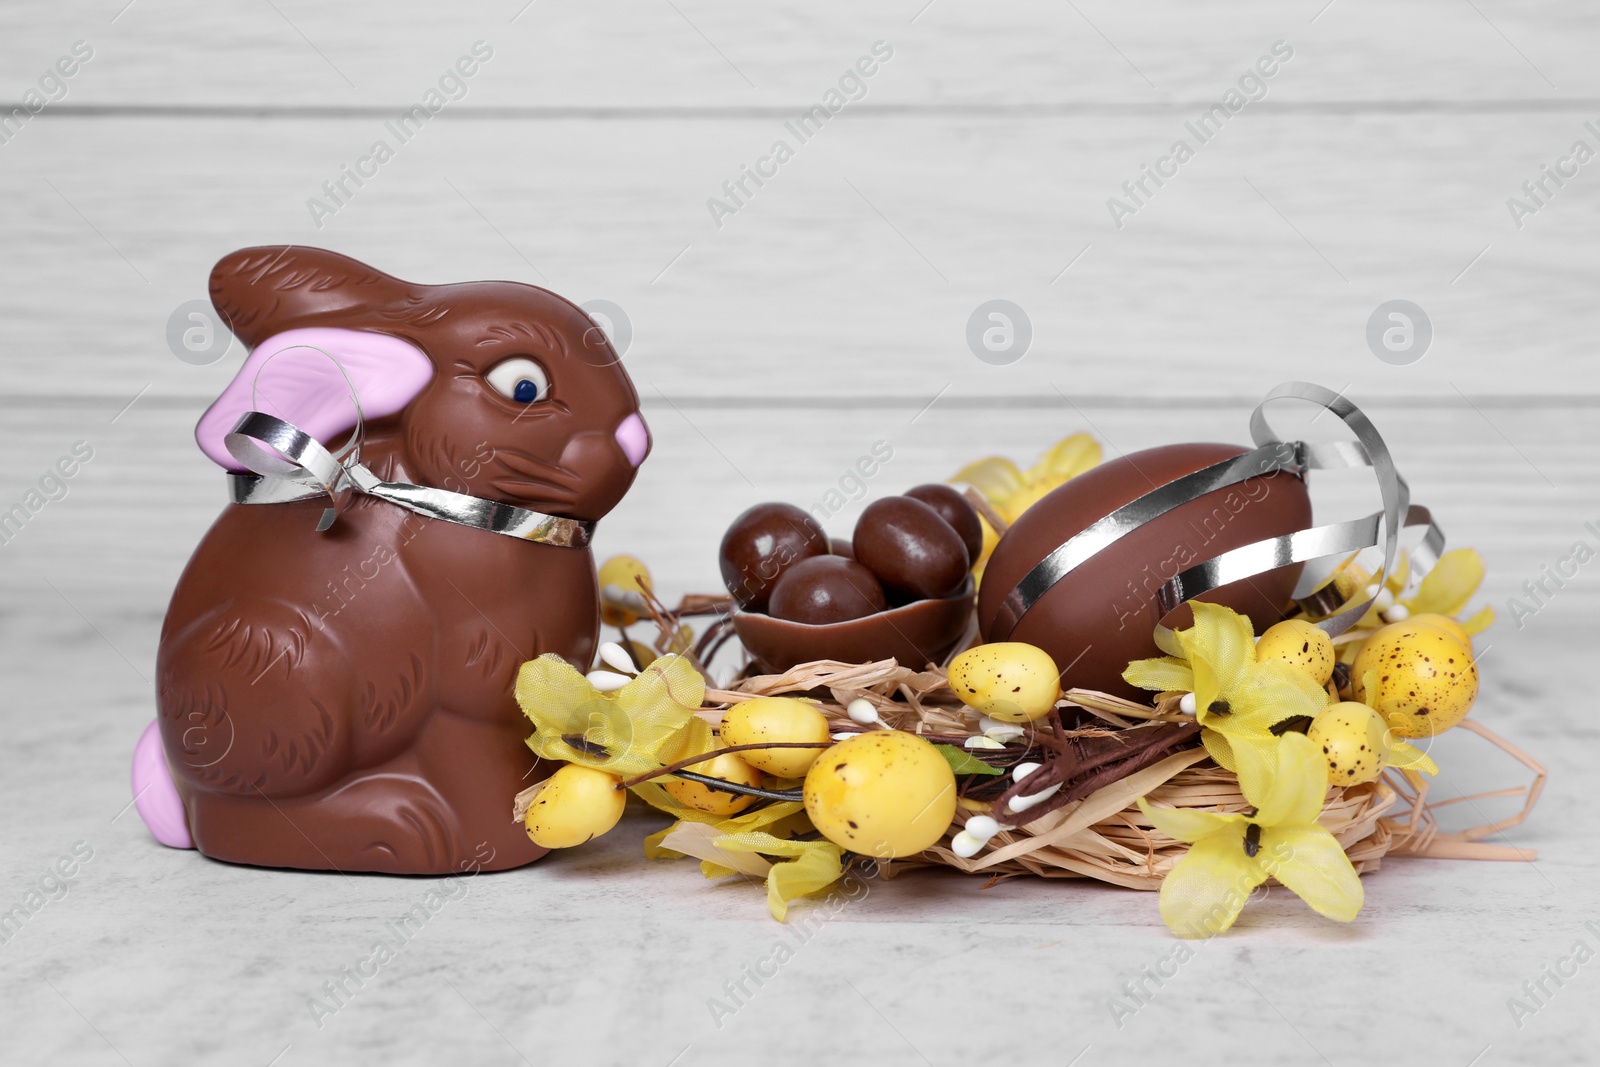 Photo of Easter celebration. Funny chocolate bunny near nest with sweet eggs and candies on white textured background